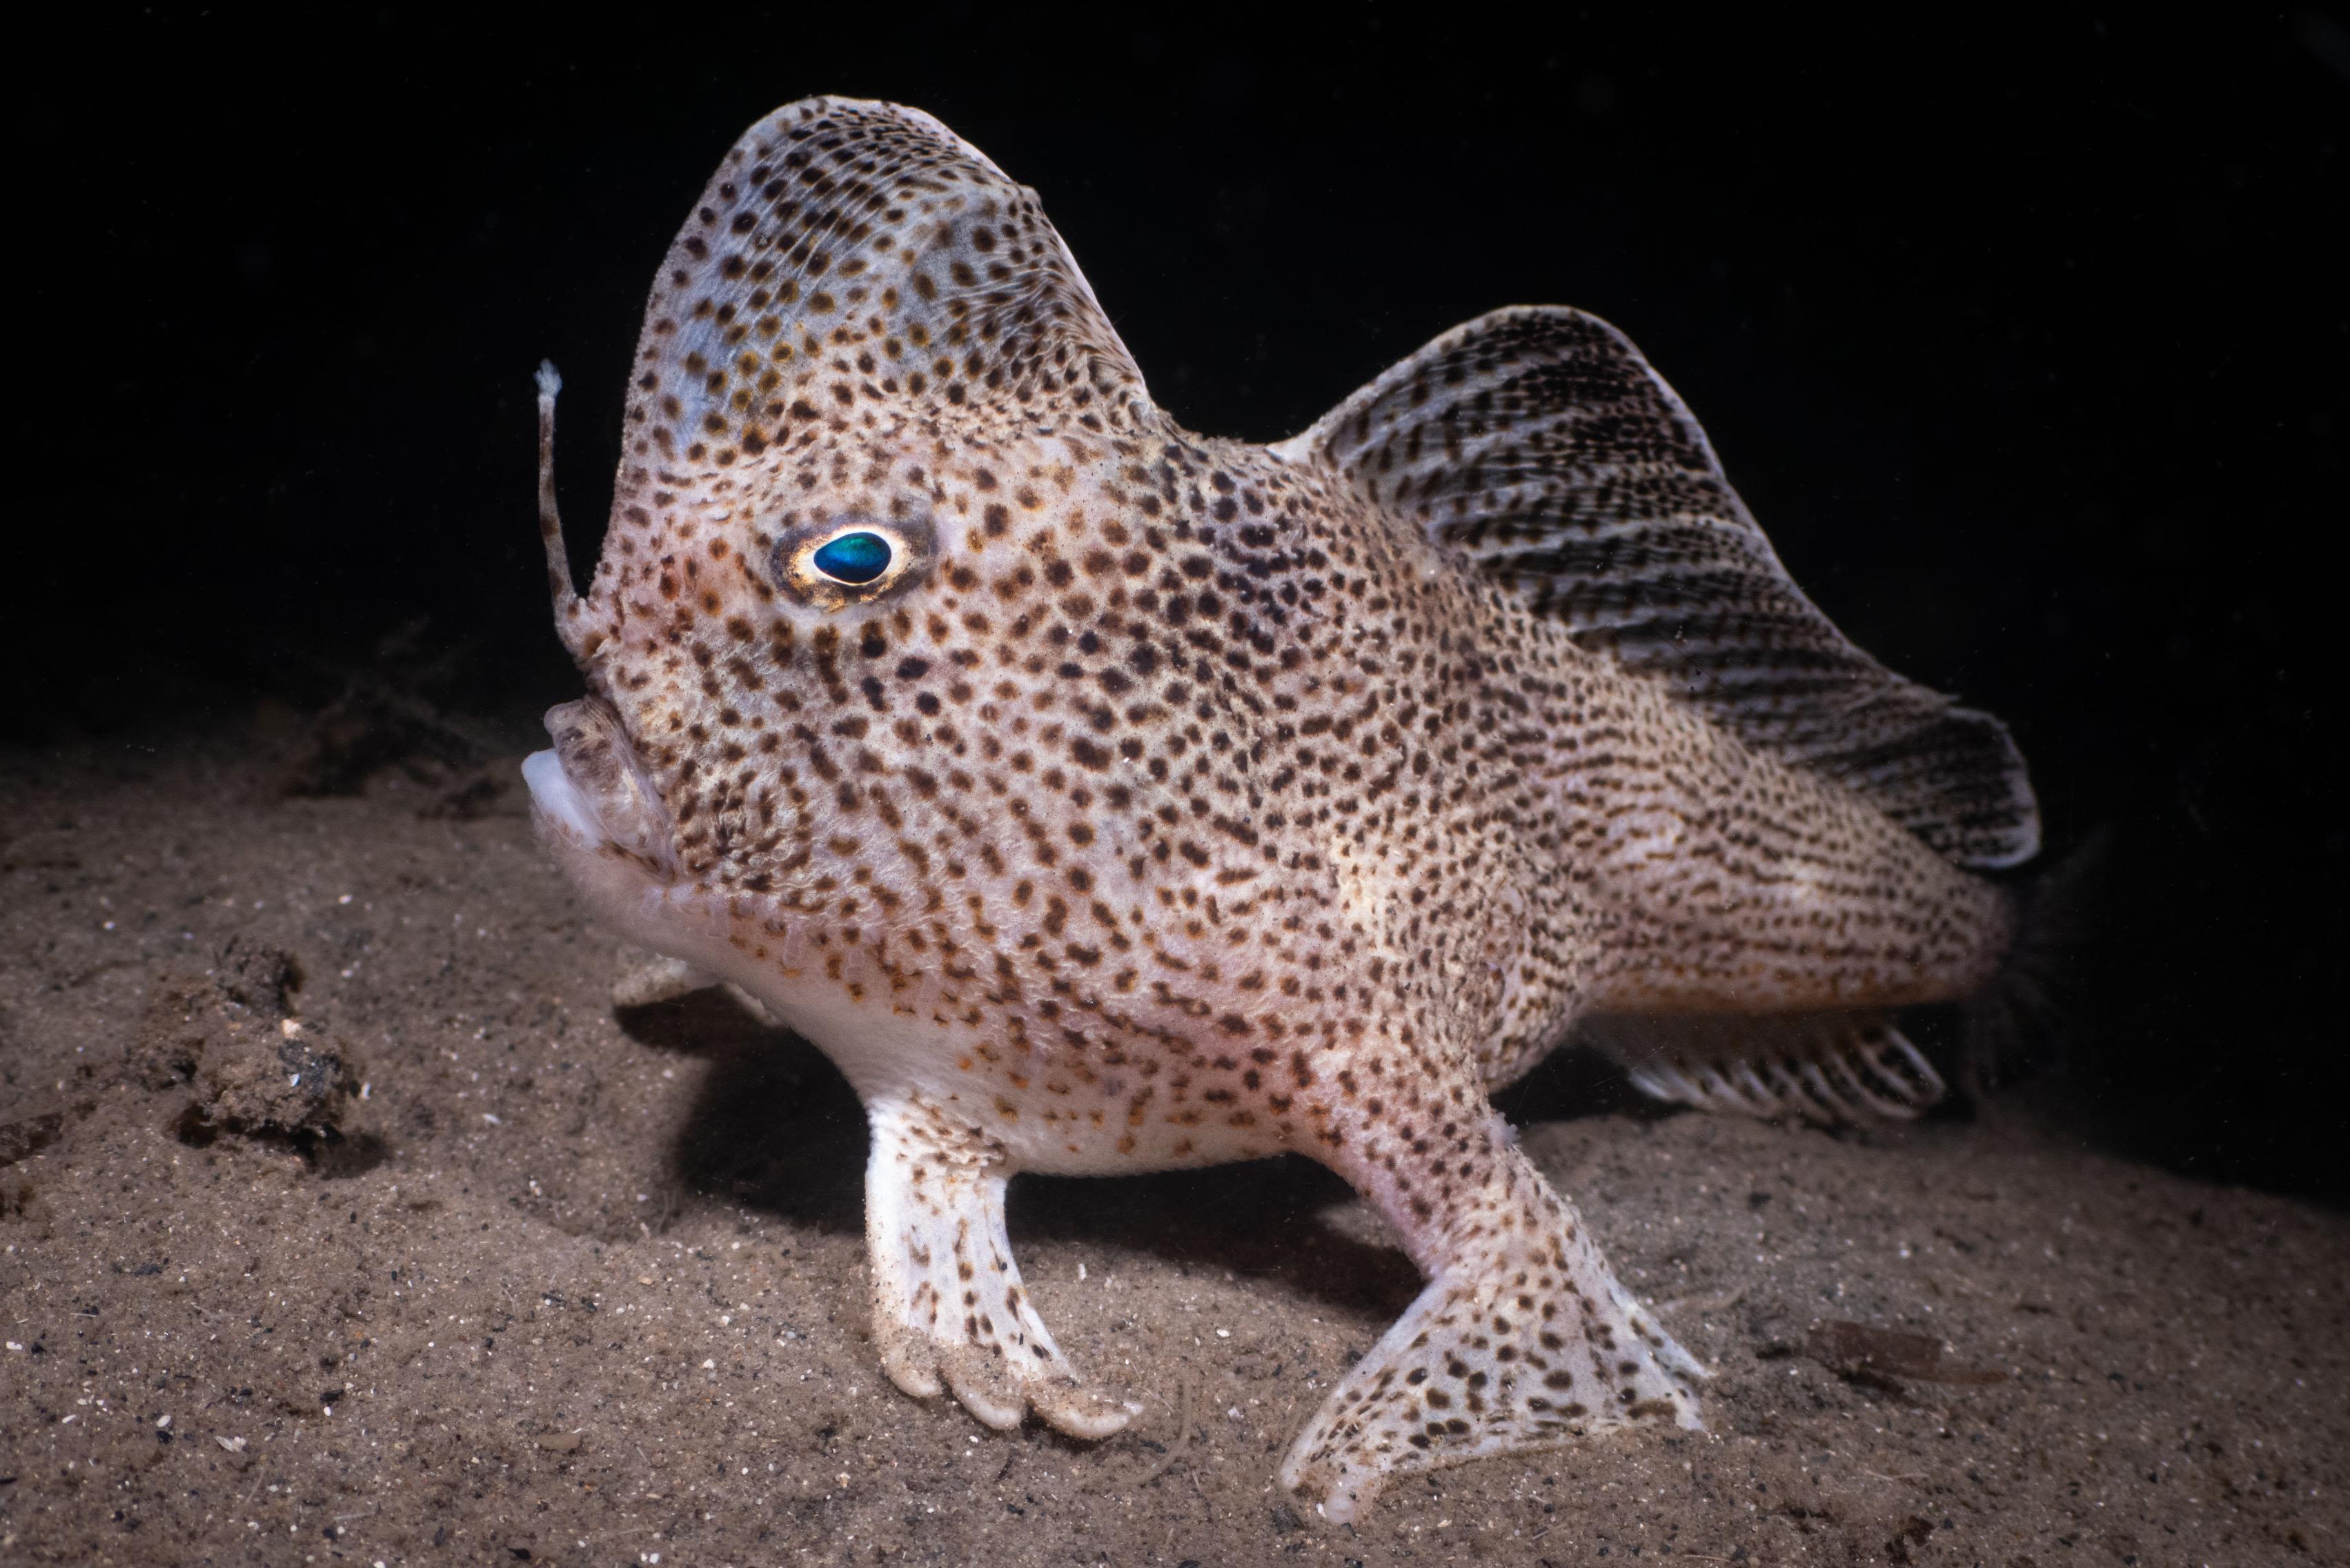 Photographer captures image of rare fish that walks on its 'hands